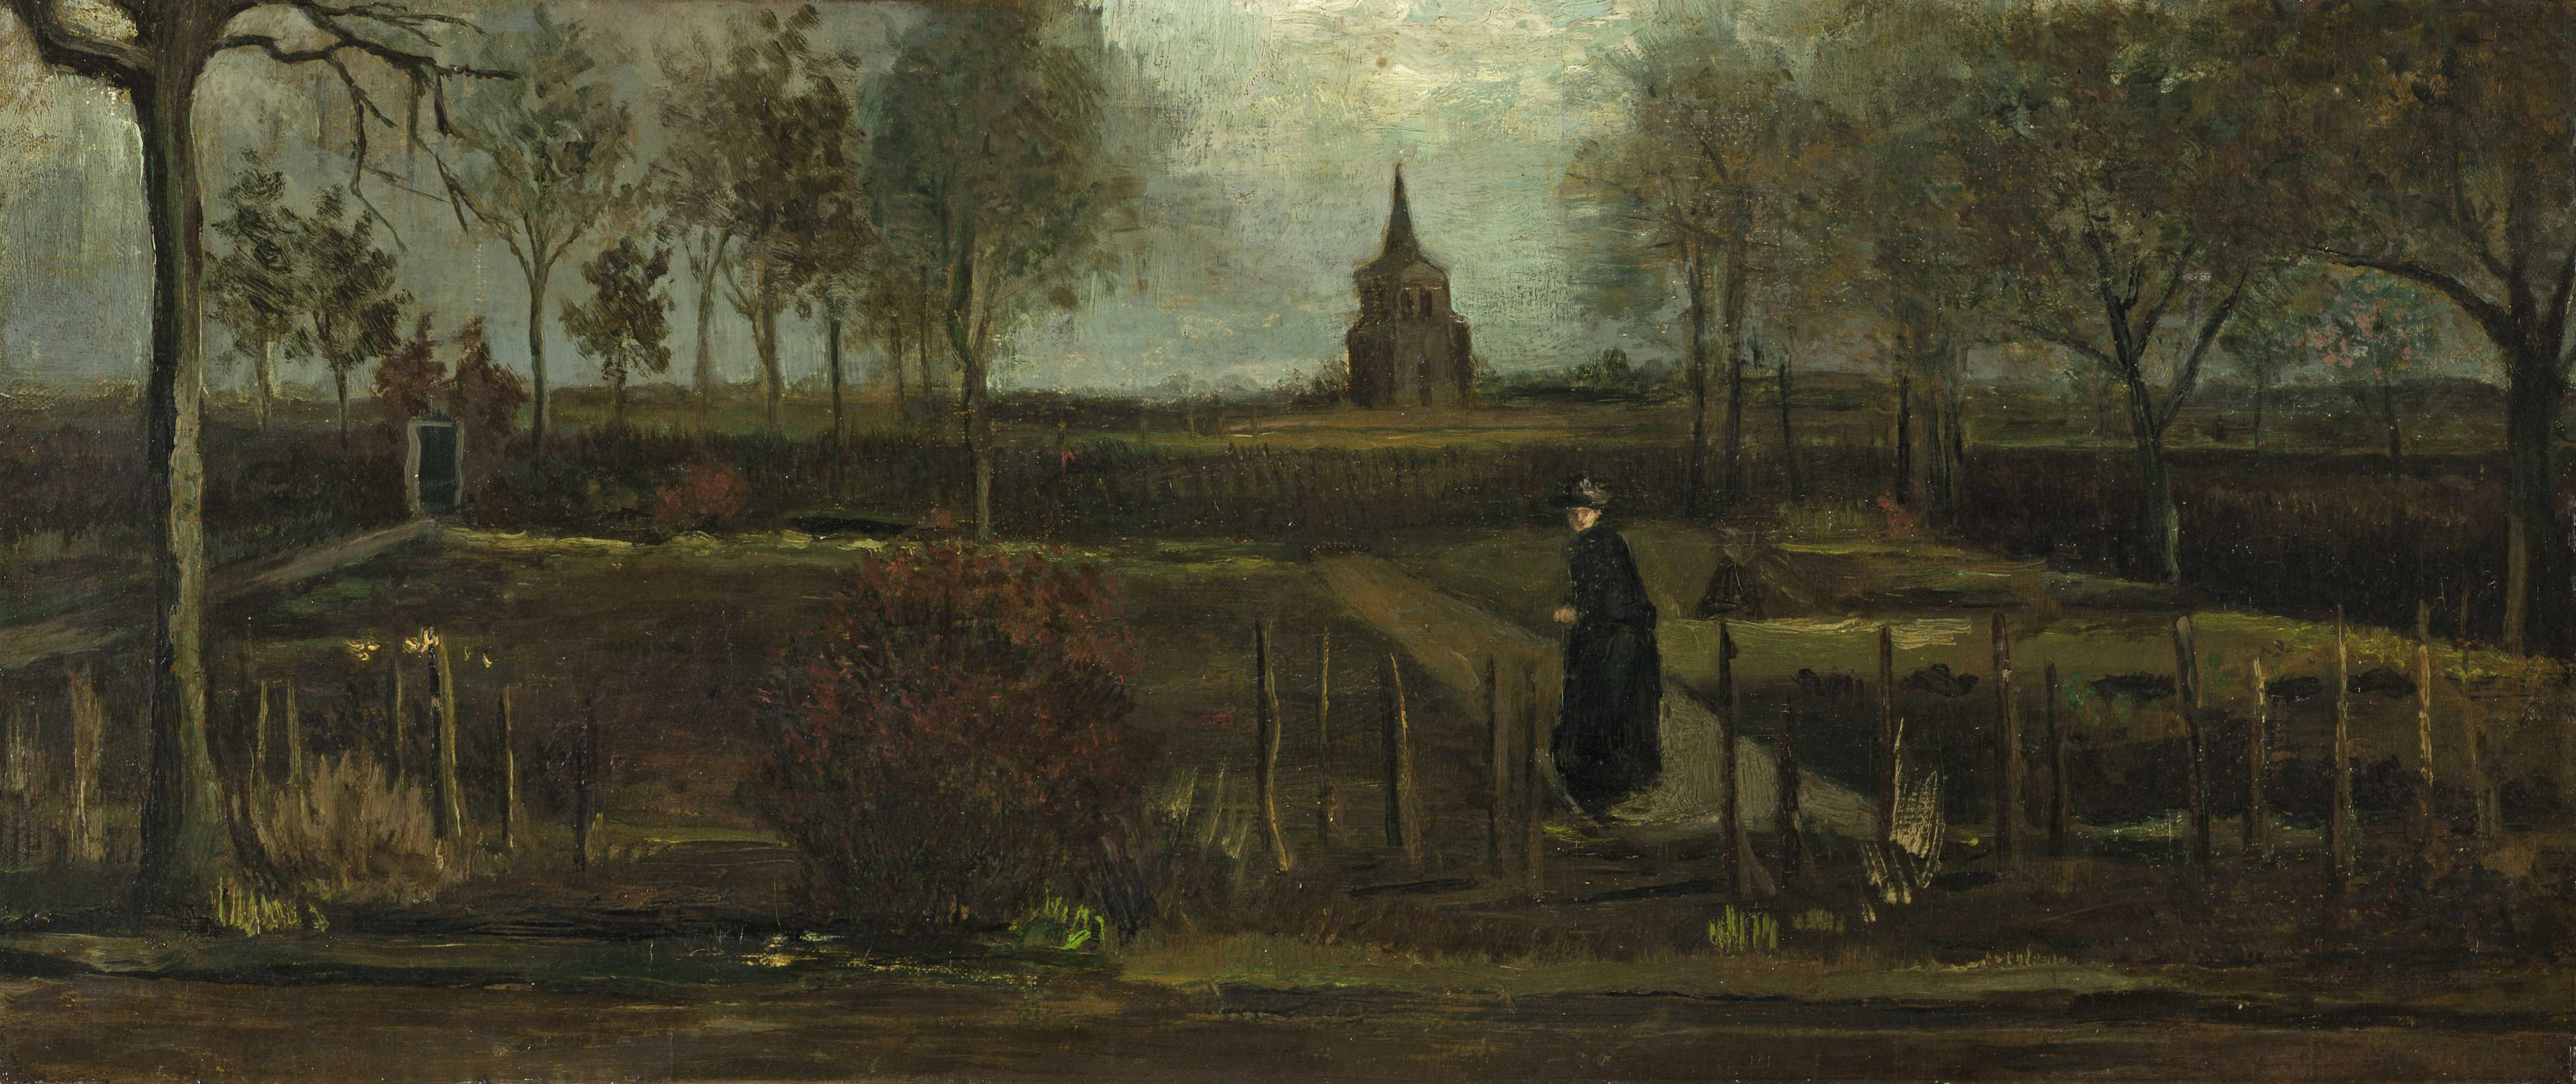 An oil painting shows a woman walking along a path in a garden in front of a building.